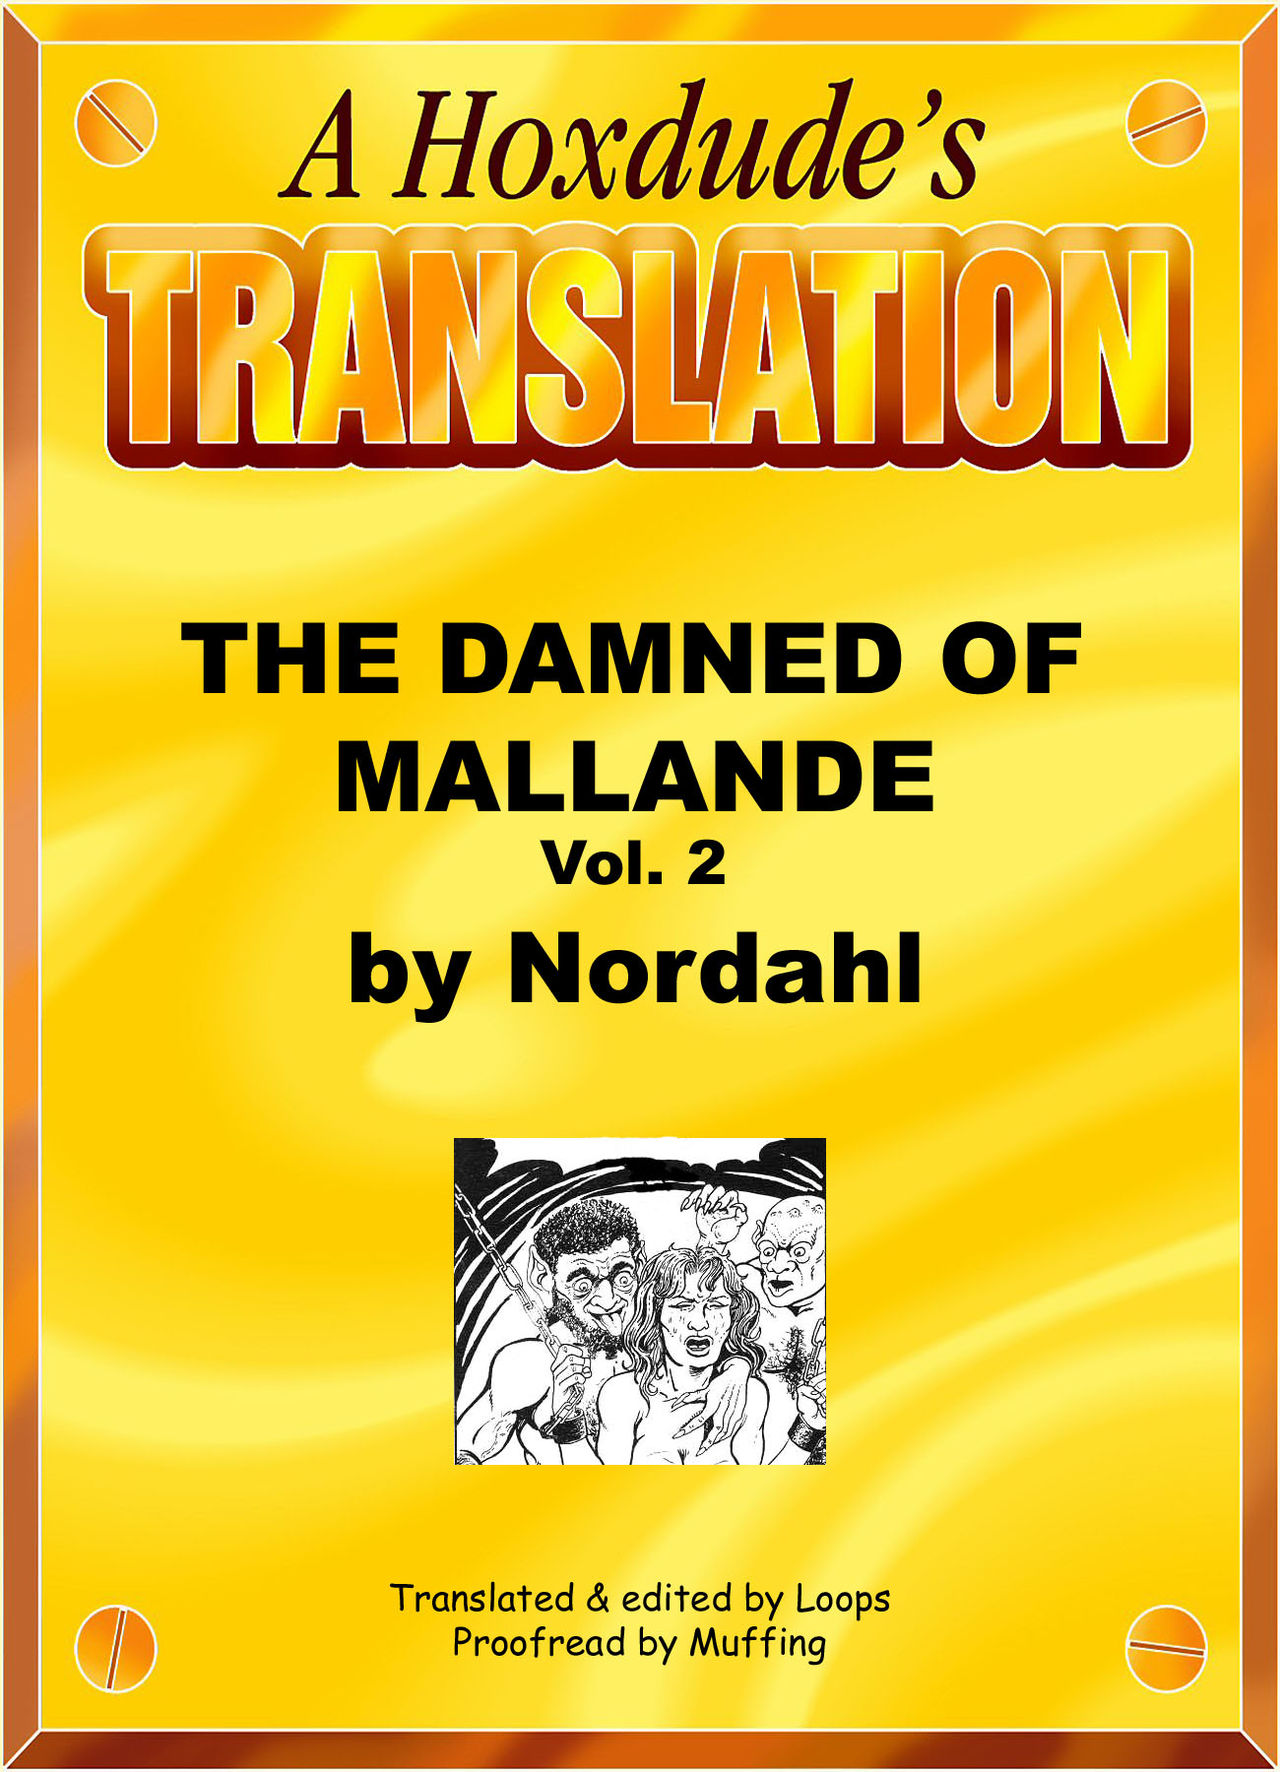 [Nordahl] The Damned of Mallande - Volume #2 [English] {Loops} 